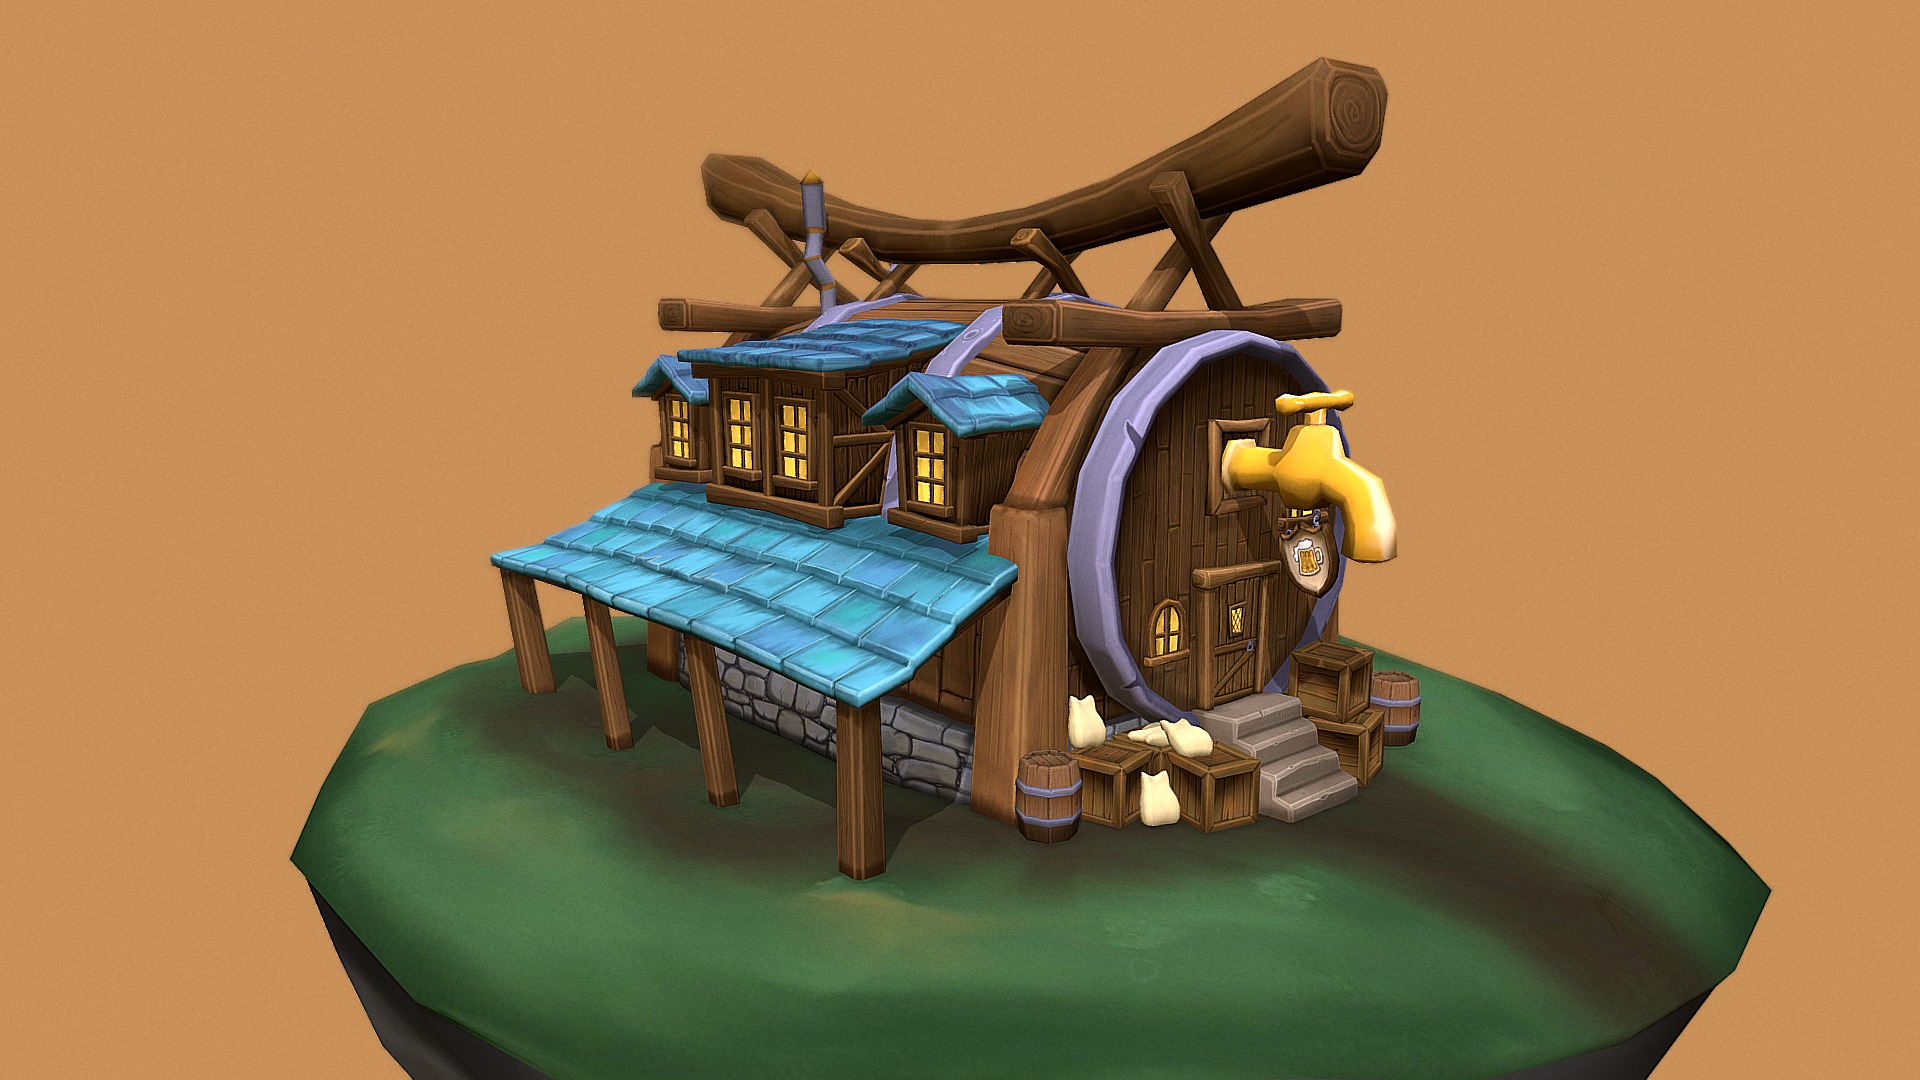 3D model Tavern – Hand Painted - This is a 3D model of the Tavern - Hand Painted. The 3D model is about a toy house on a green surface.